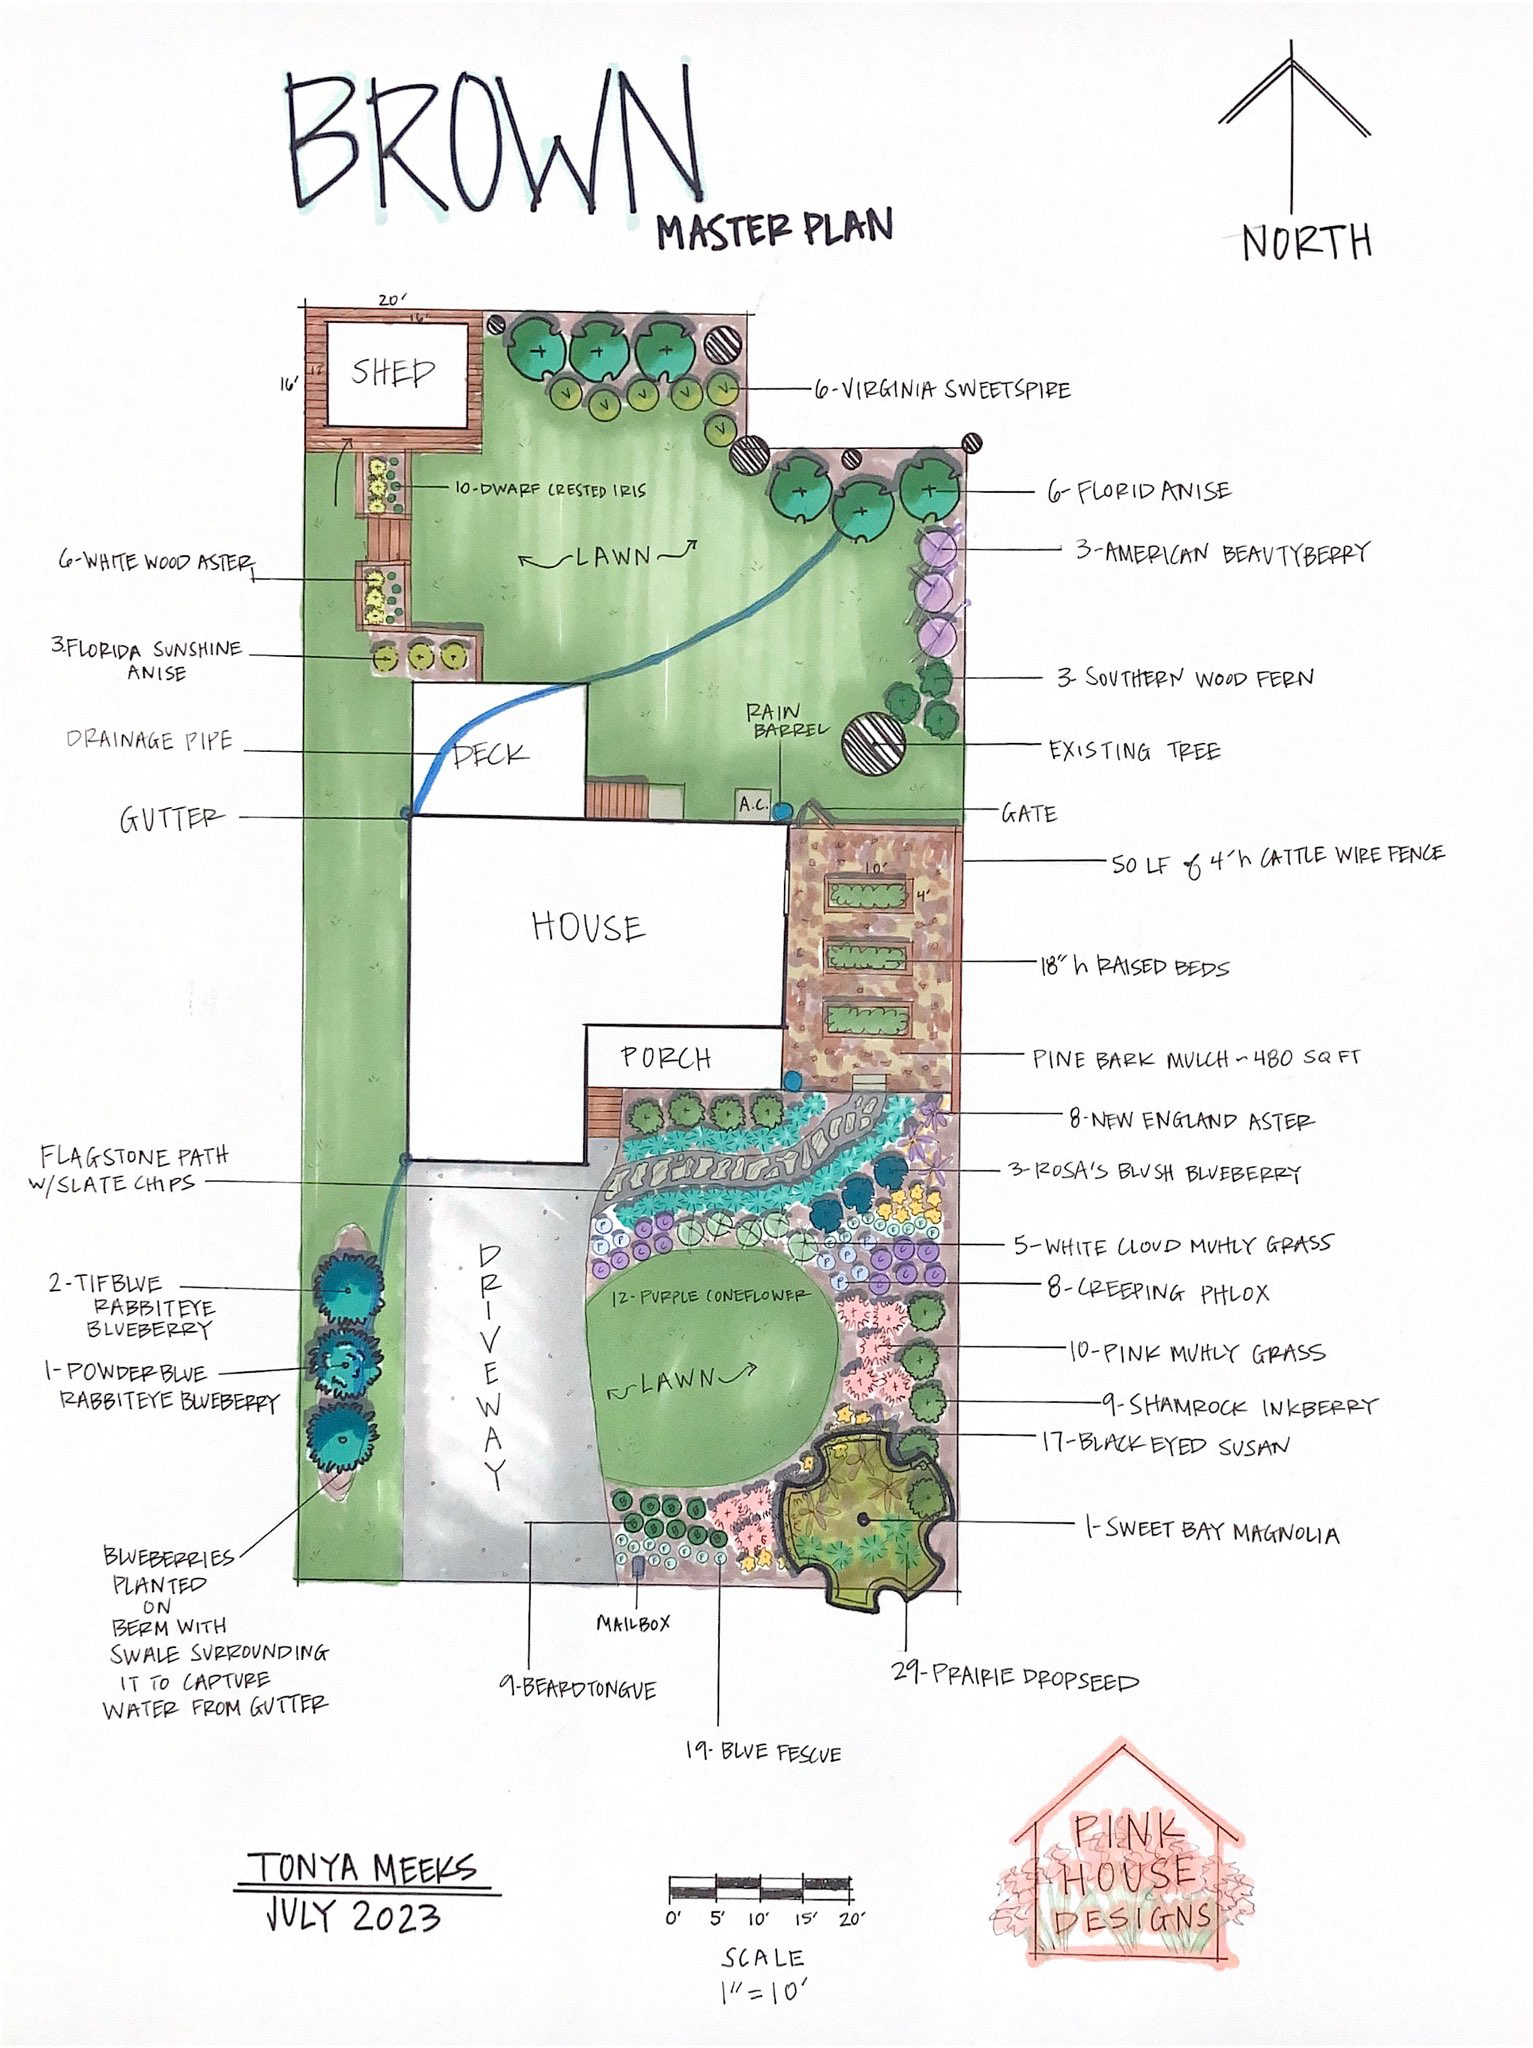 color drawing of a garden plan showing plants and buildings